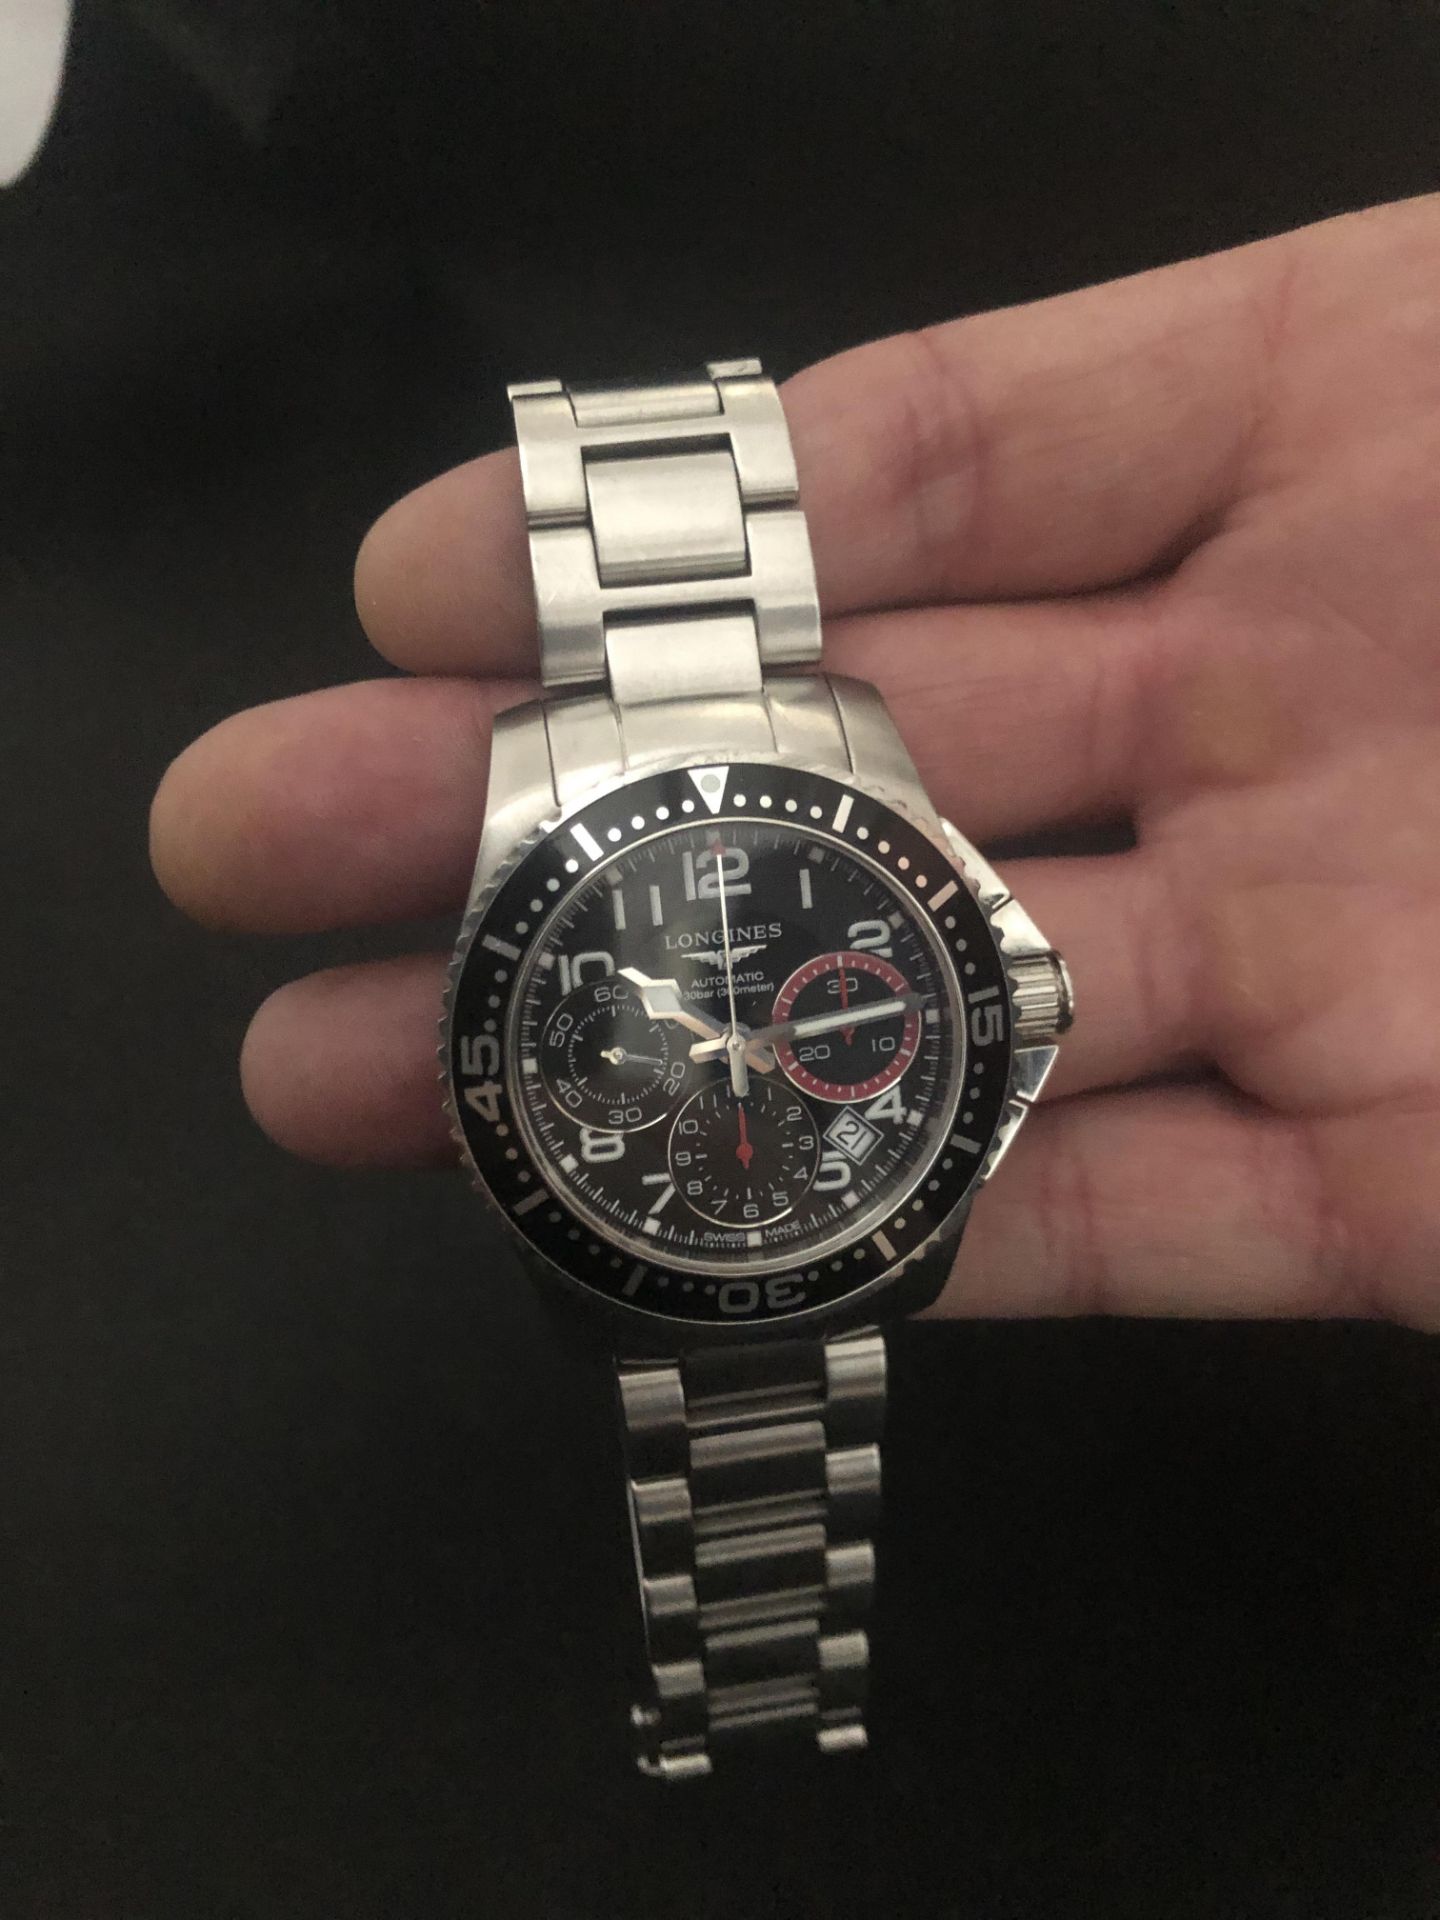 Brand: Longines Model: Hydro Conquest Chronograph Description: Longines Hydro Conquest Chronograph - Image 3 of 3